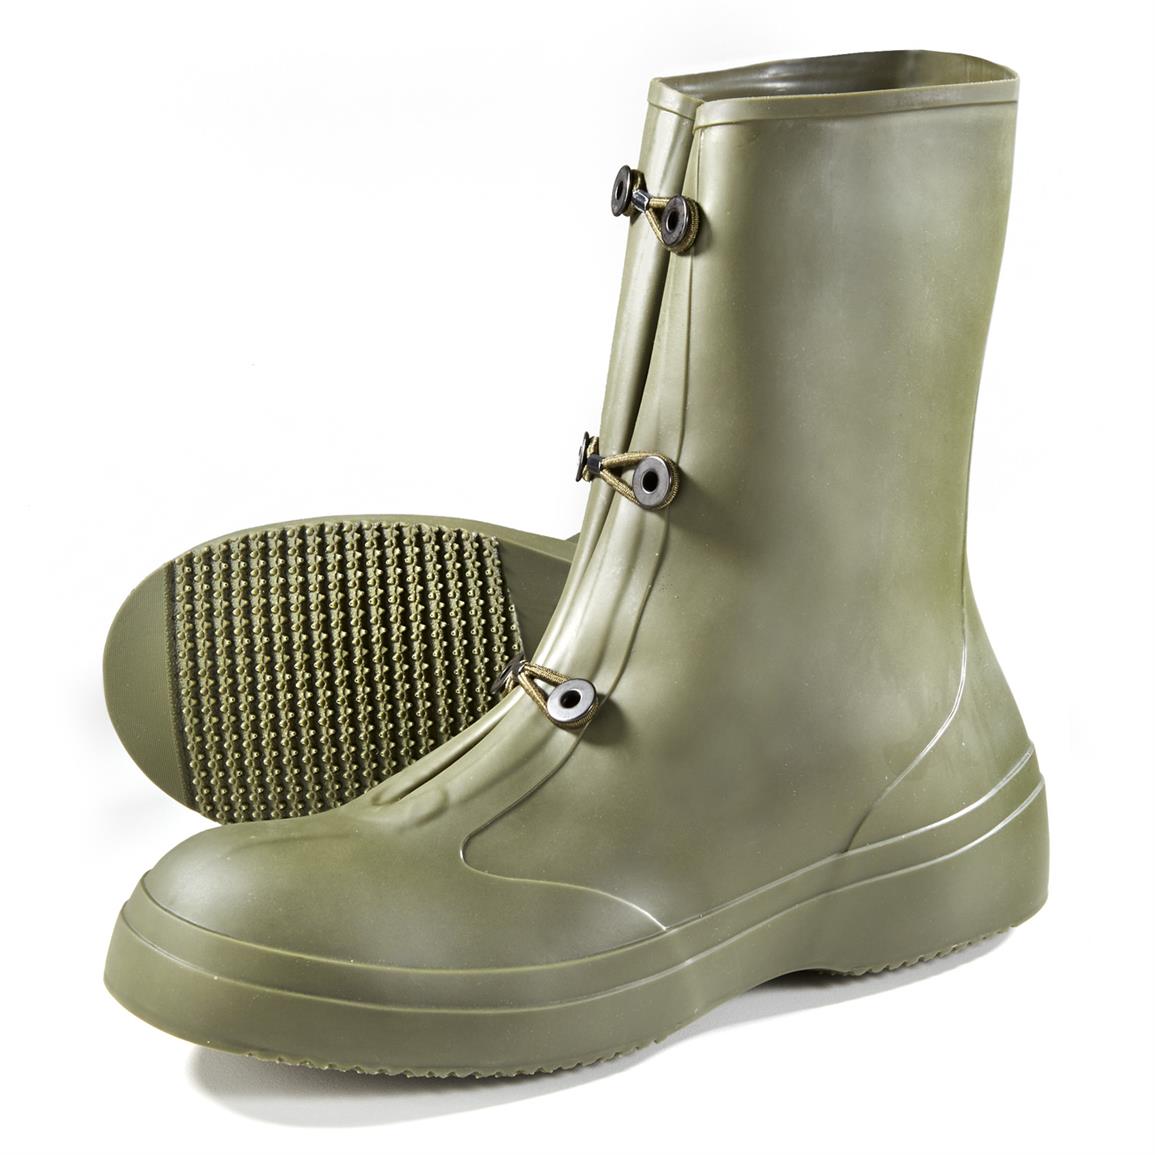 New U.S. Military-issue Overboots - 625518, Winter & Snow Boots at ...